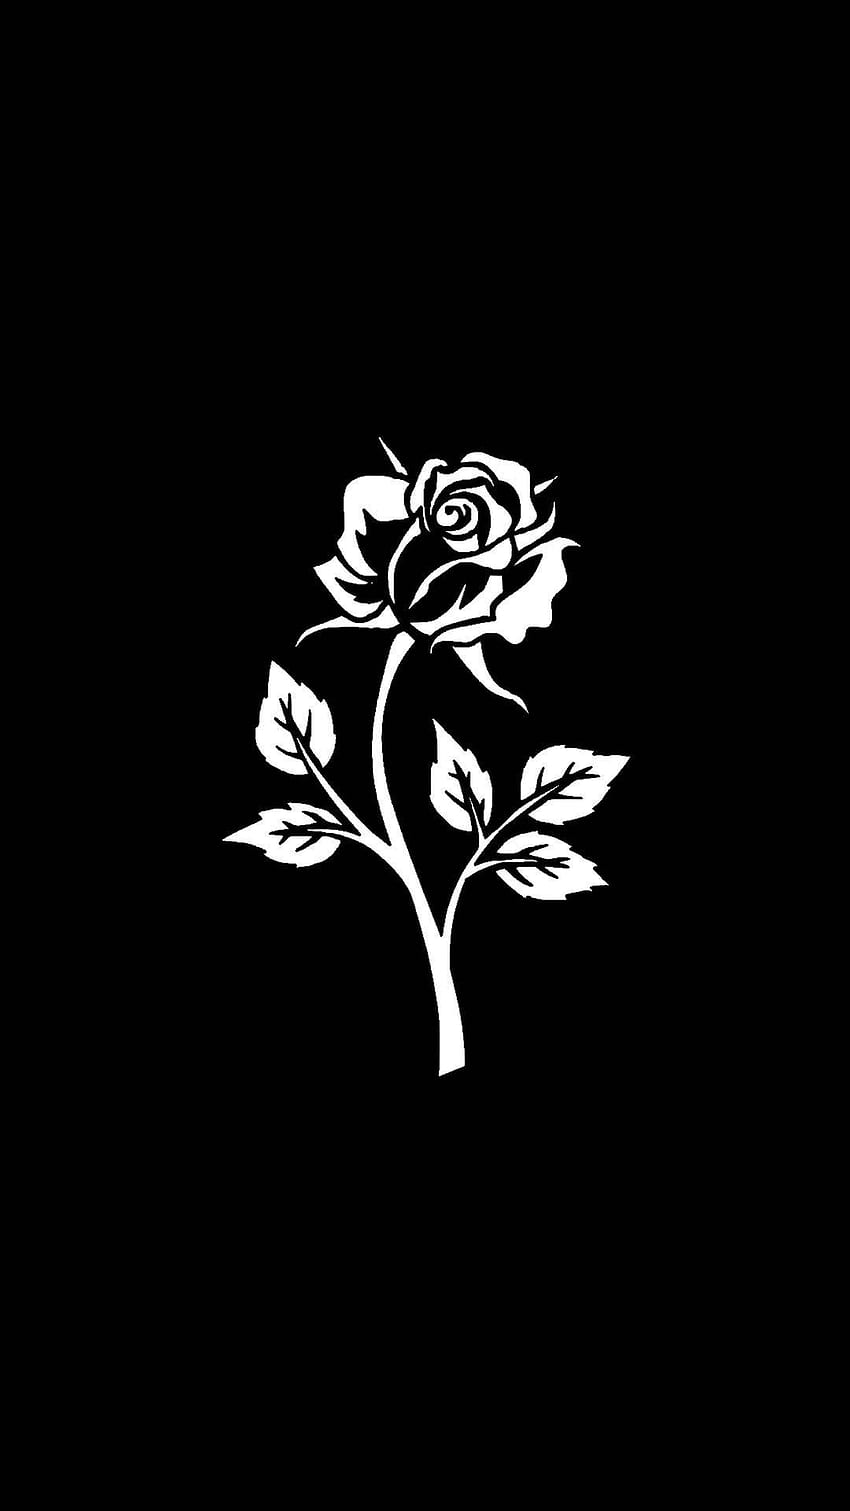 Black on phone with white rose. Black background , Black and white flowers, Black aesthetic , Black and White Roses iPhone HD phone wallpaper